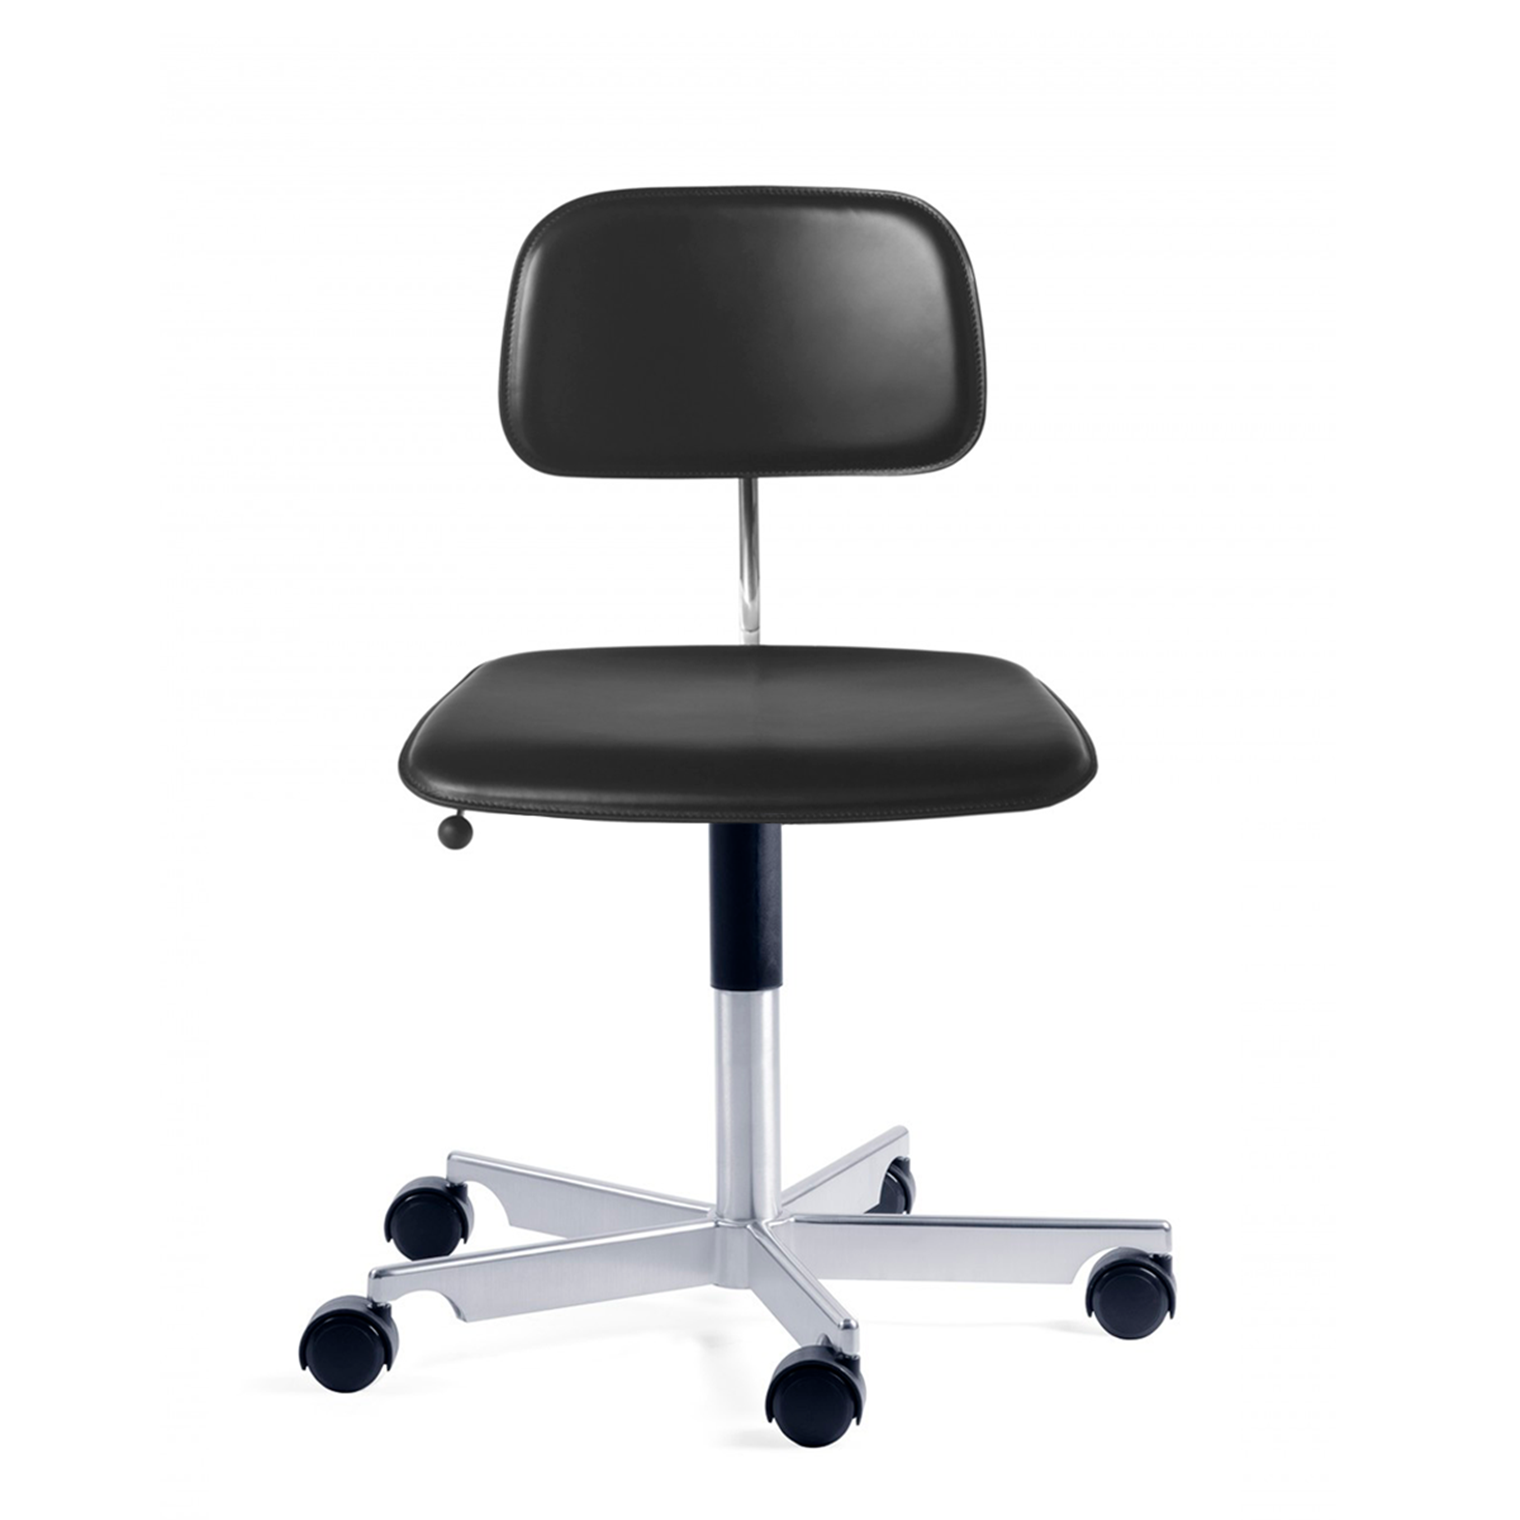 Kevi 2050 office chair